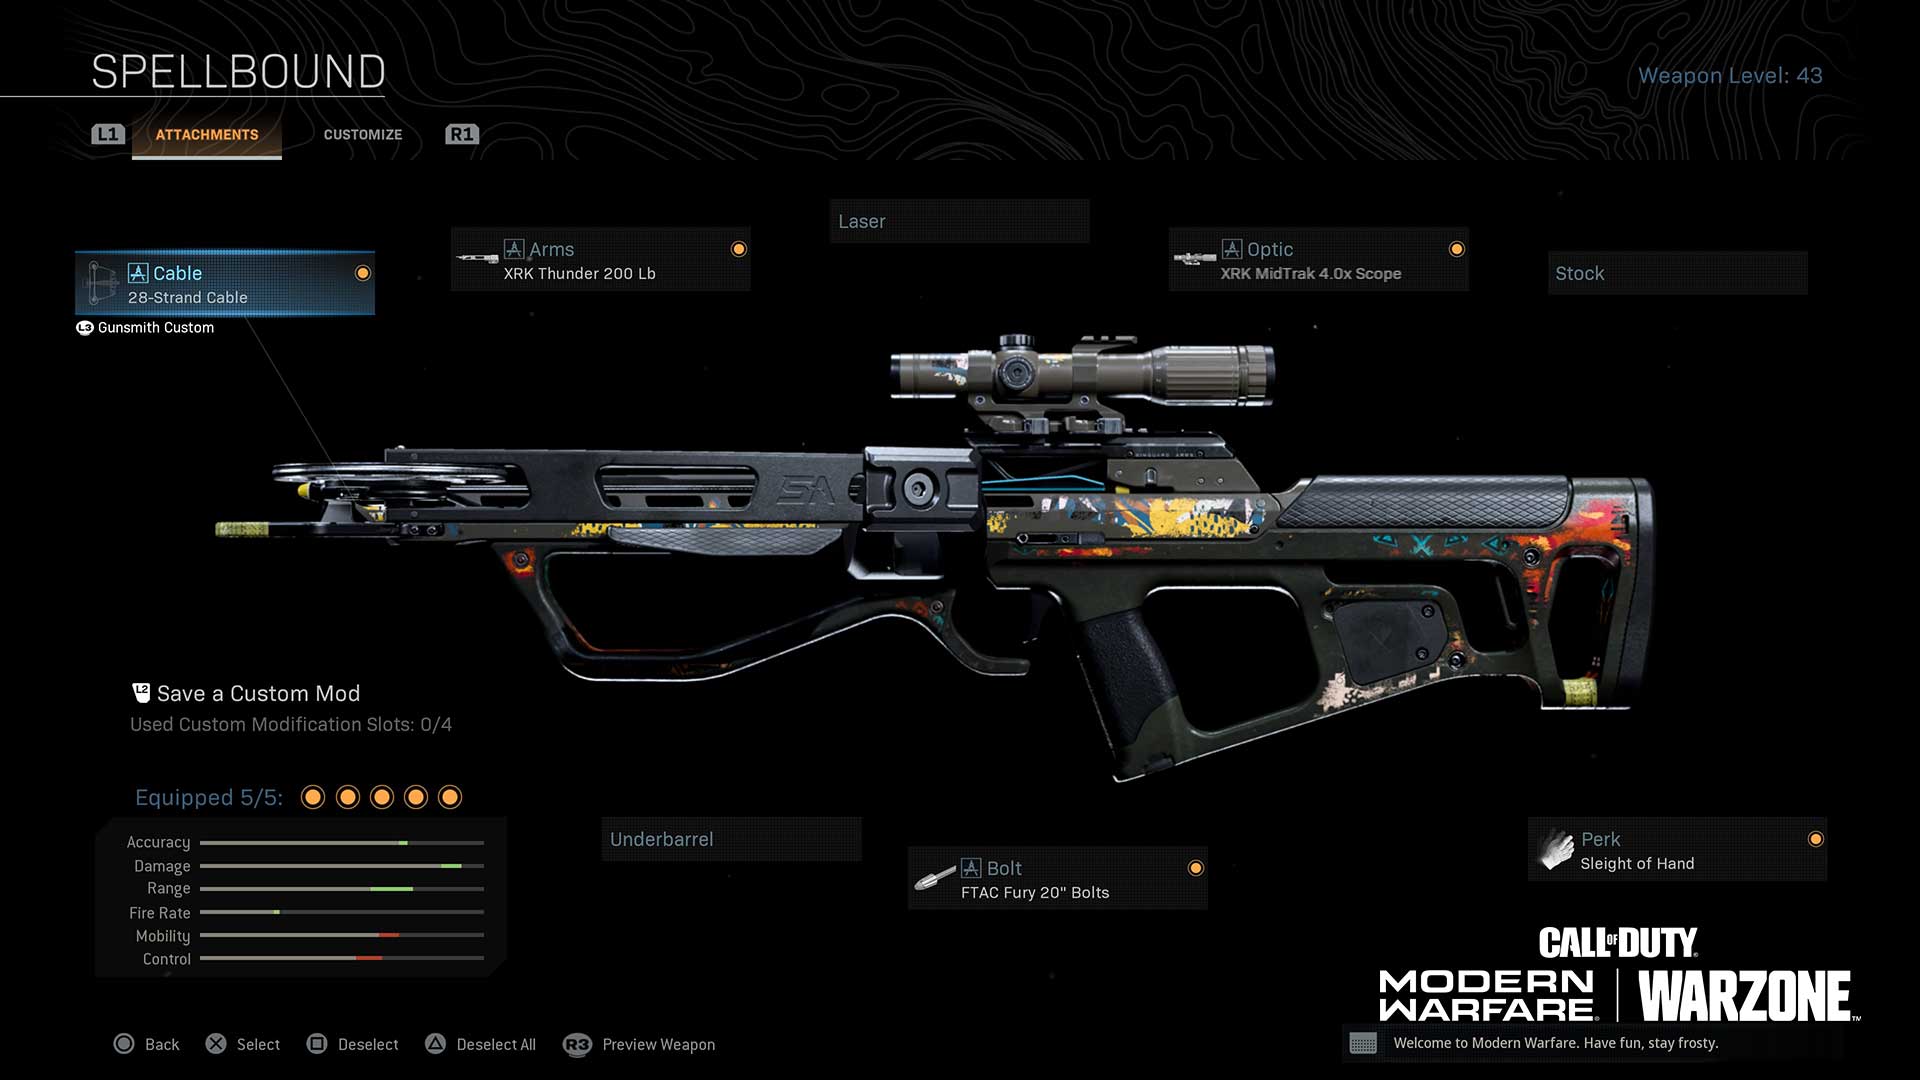 What is your favorite non “meta” weapon in Warzone? I've been